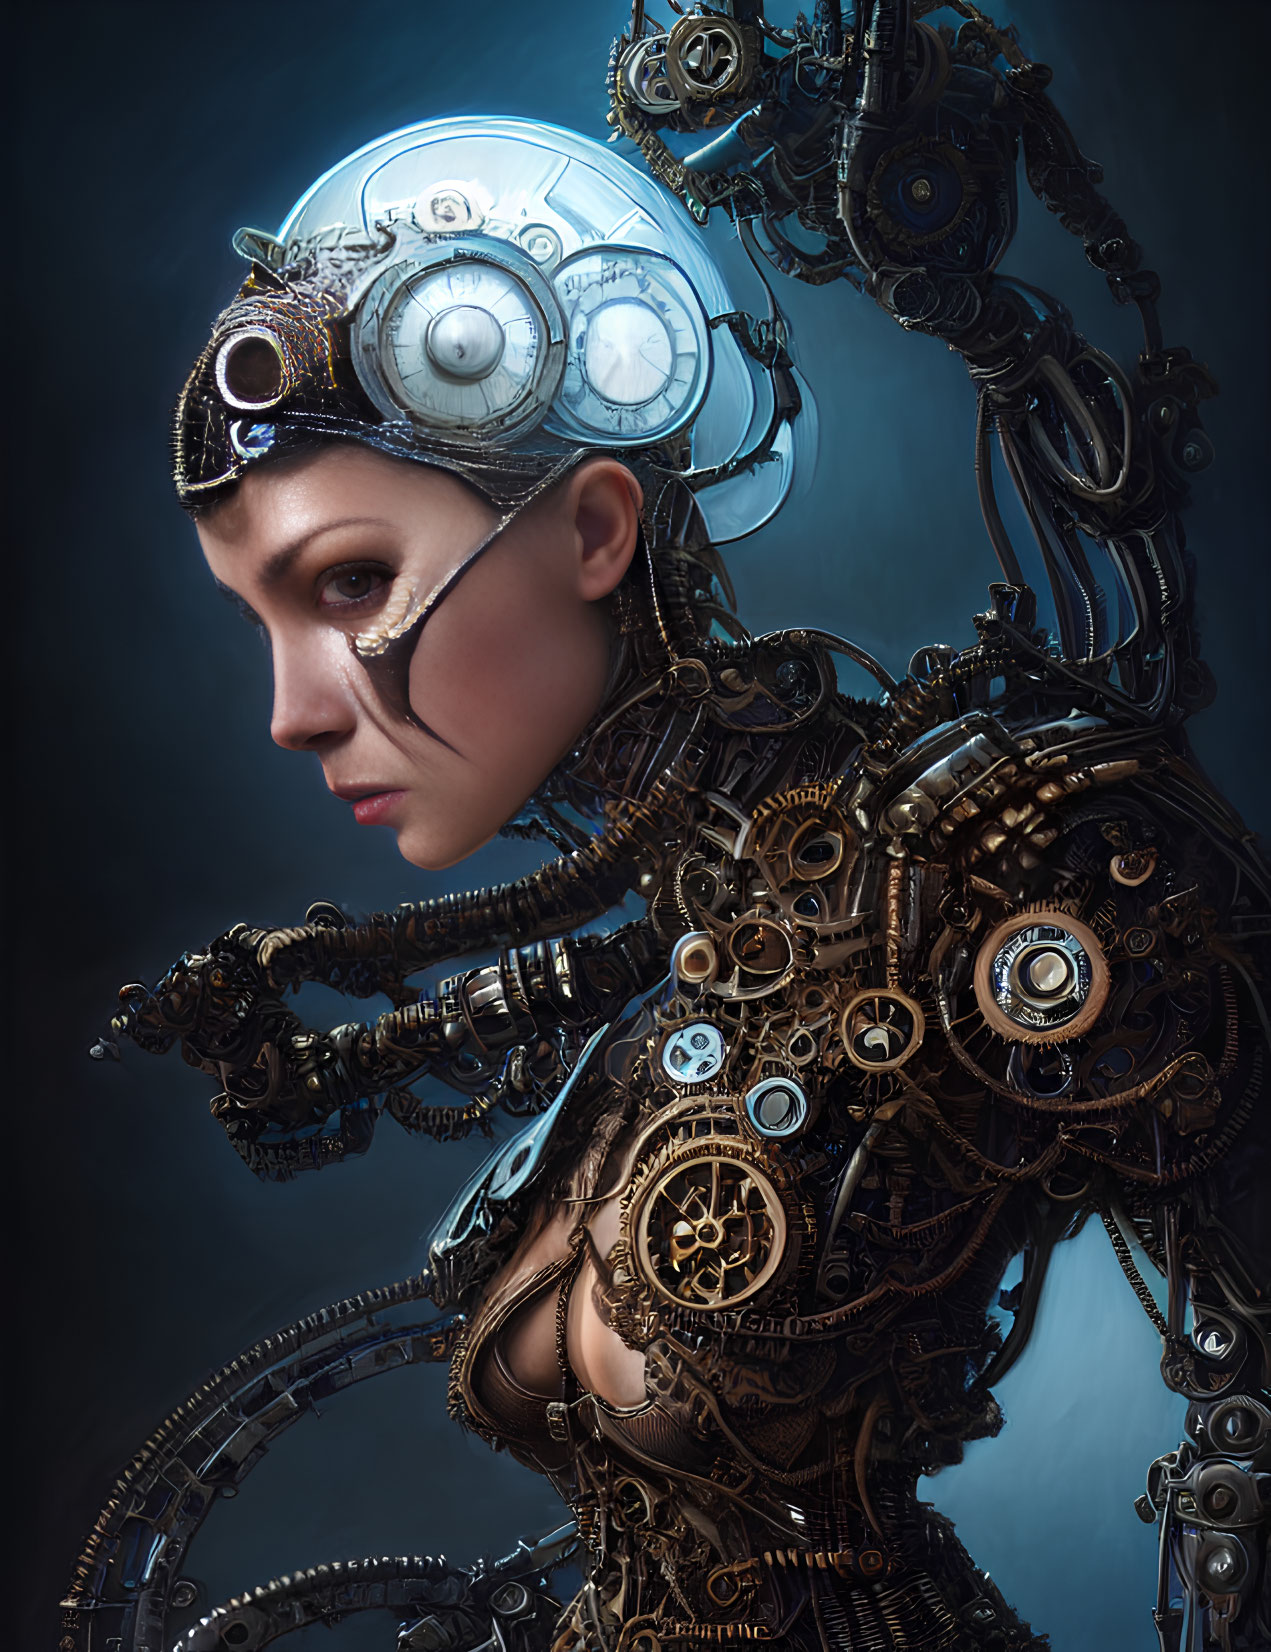 Intricate steampunk-style portrait with mechanical attire and multiple ocular devices